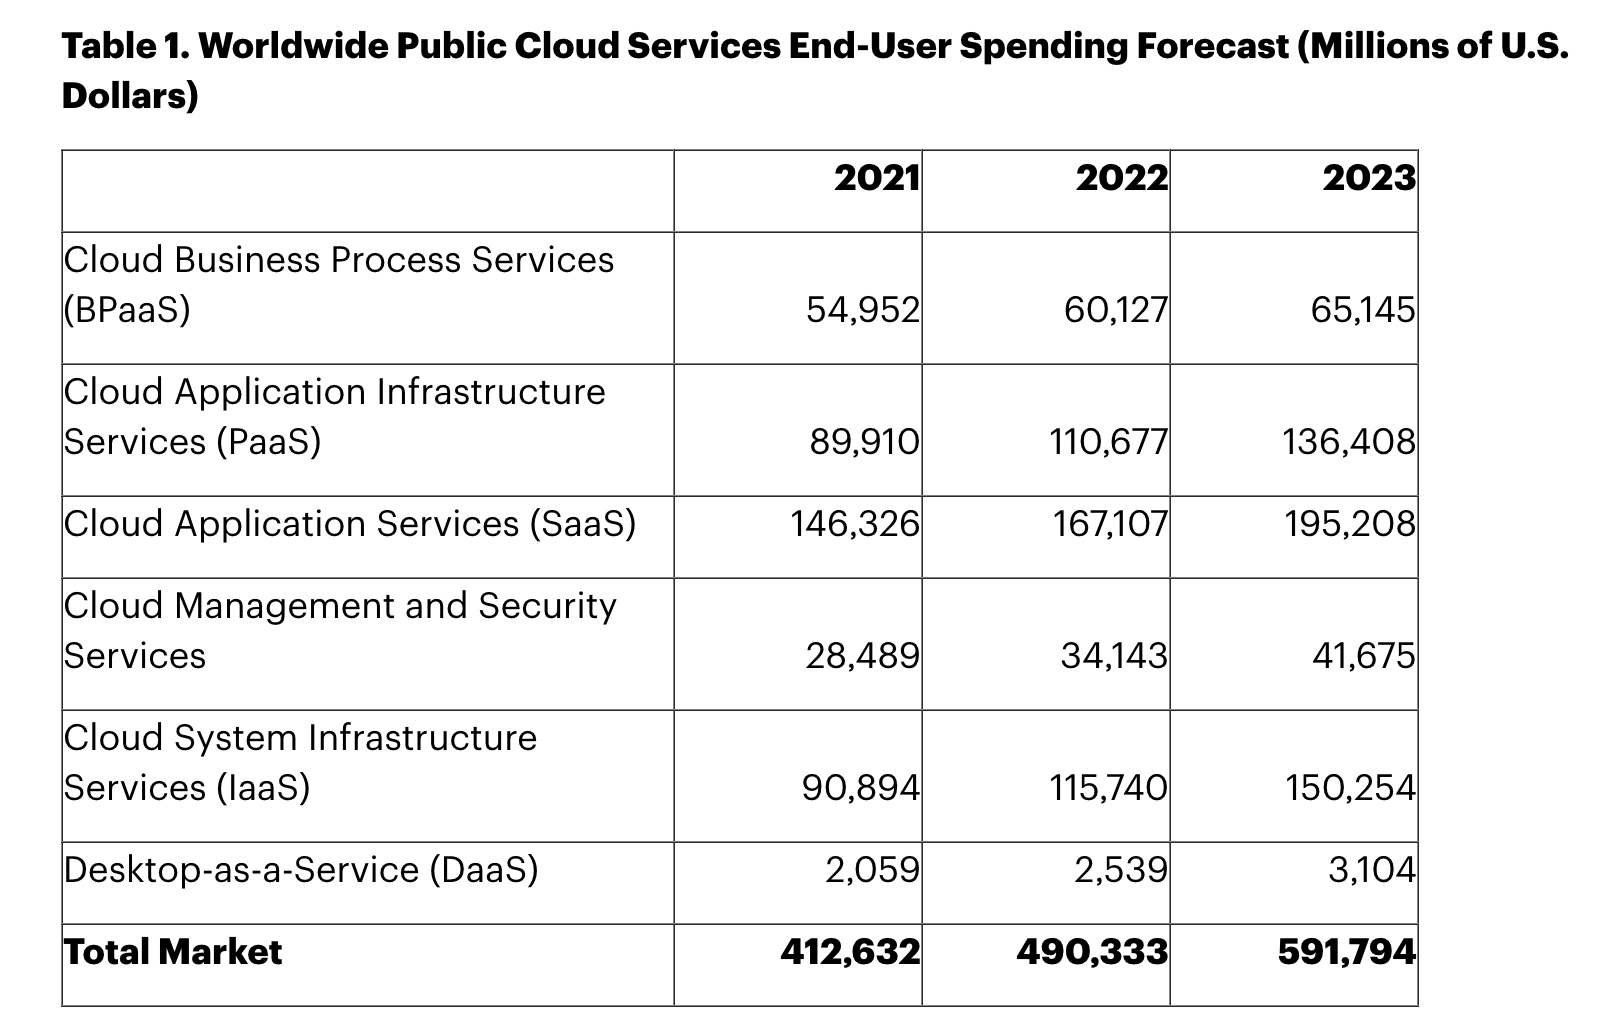 Table 1. Worldwide Public Cloud Services End-User Spending Forecast (Millions of U.IS. Dollar) chart from Gartner